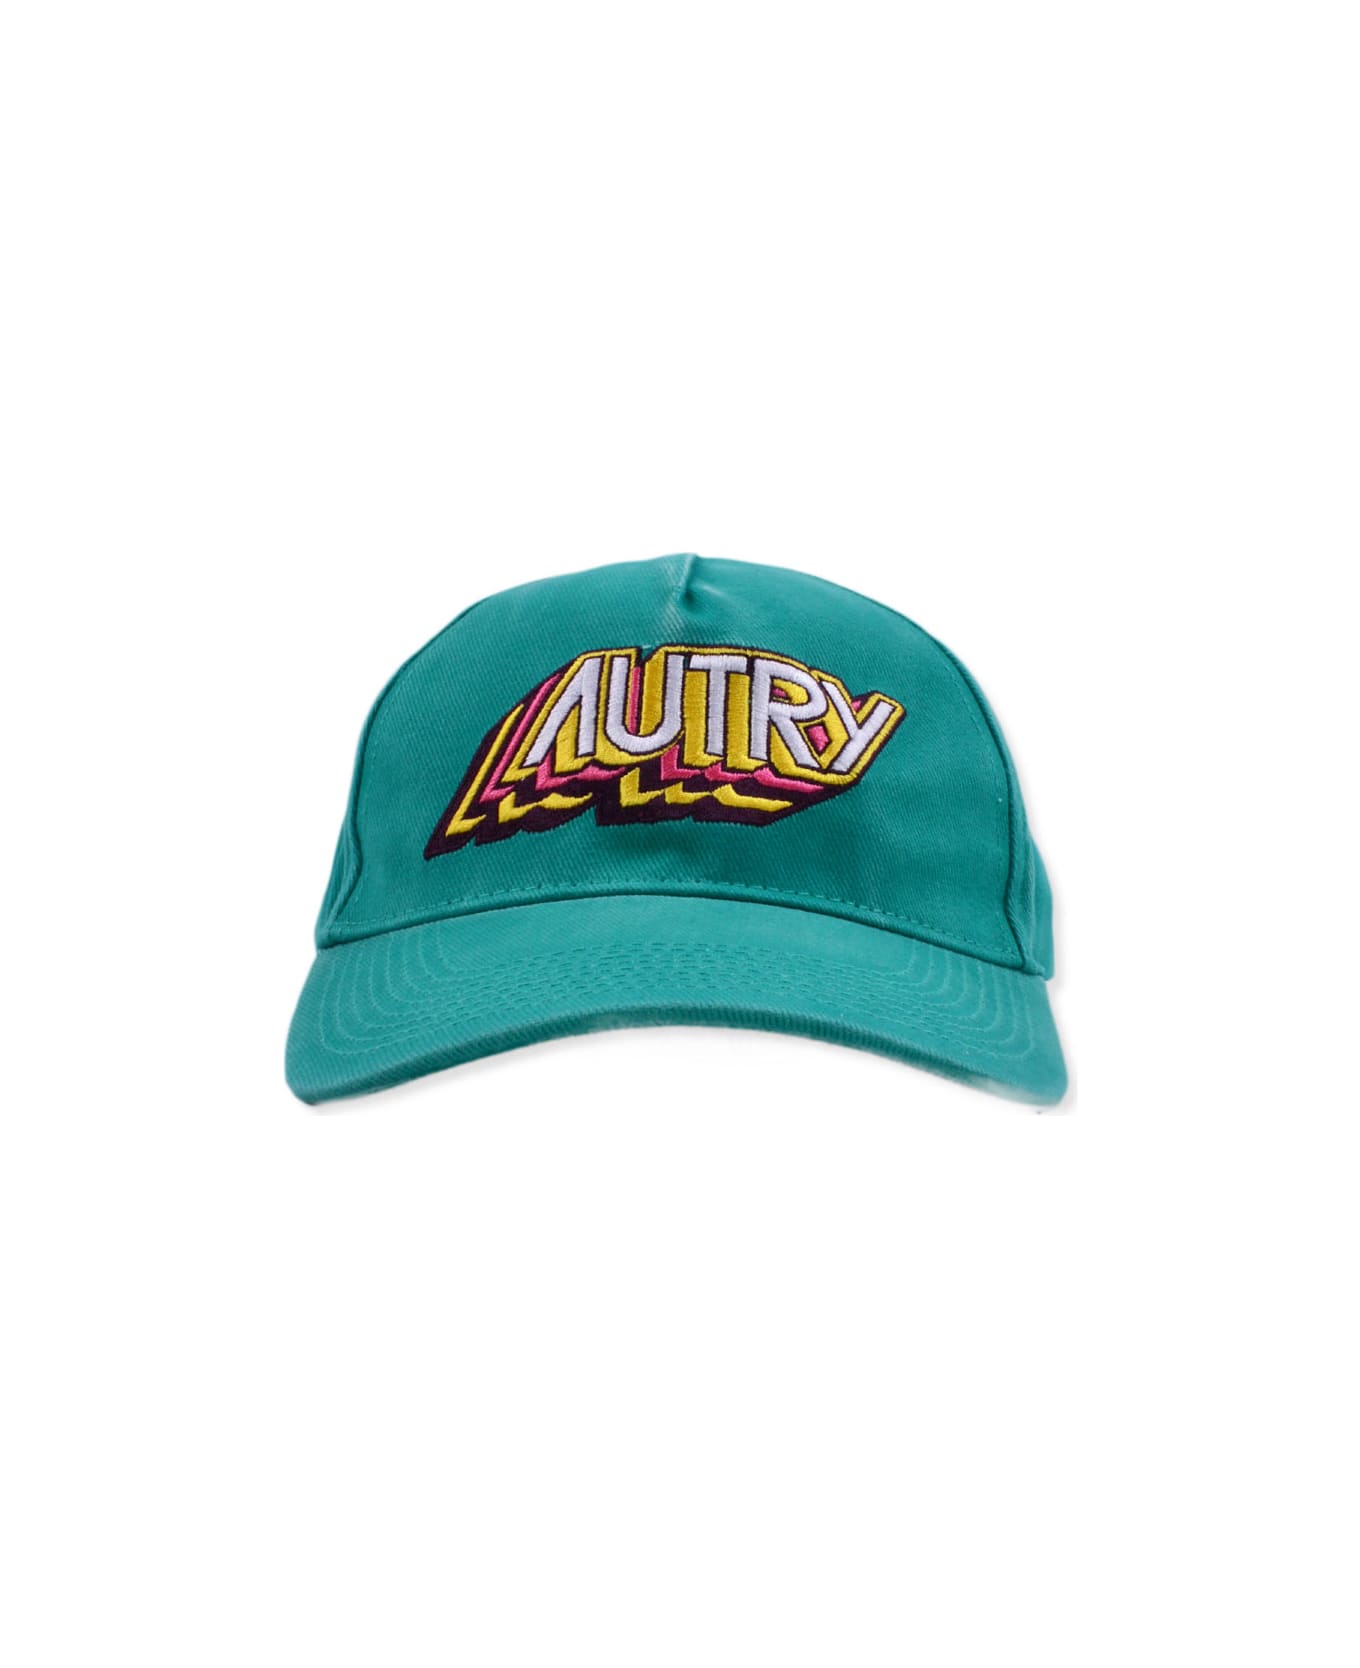 Autry Hats In Green Cotton - Verde 帽子